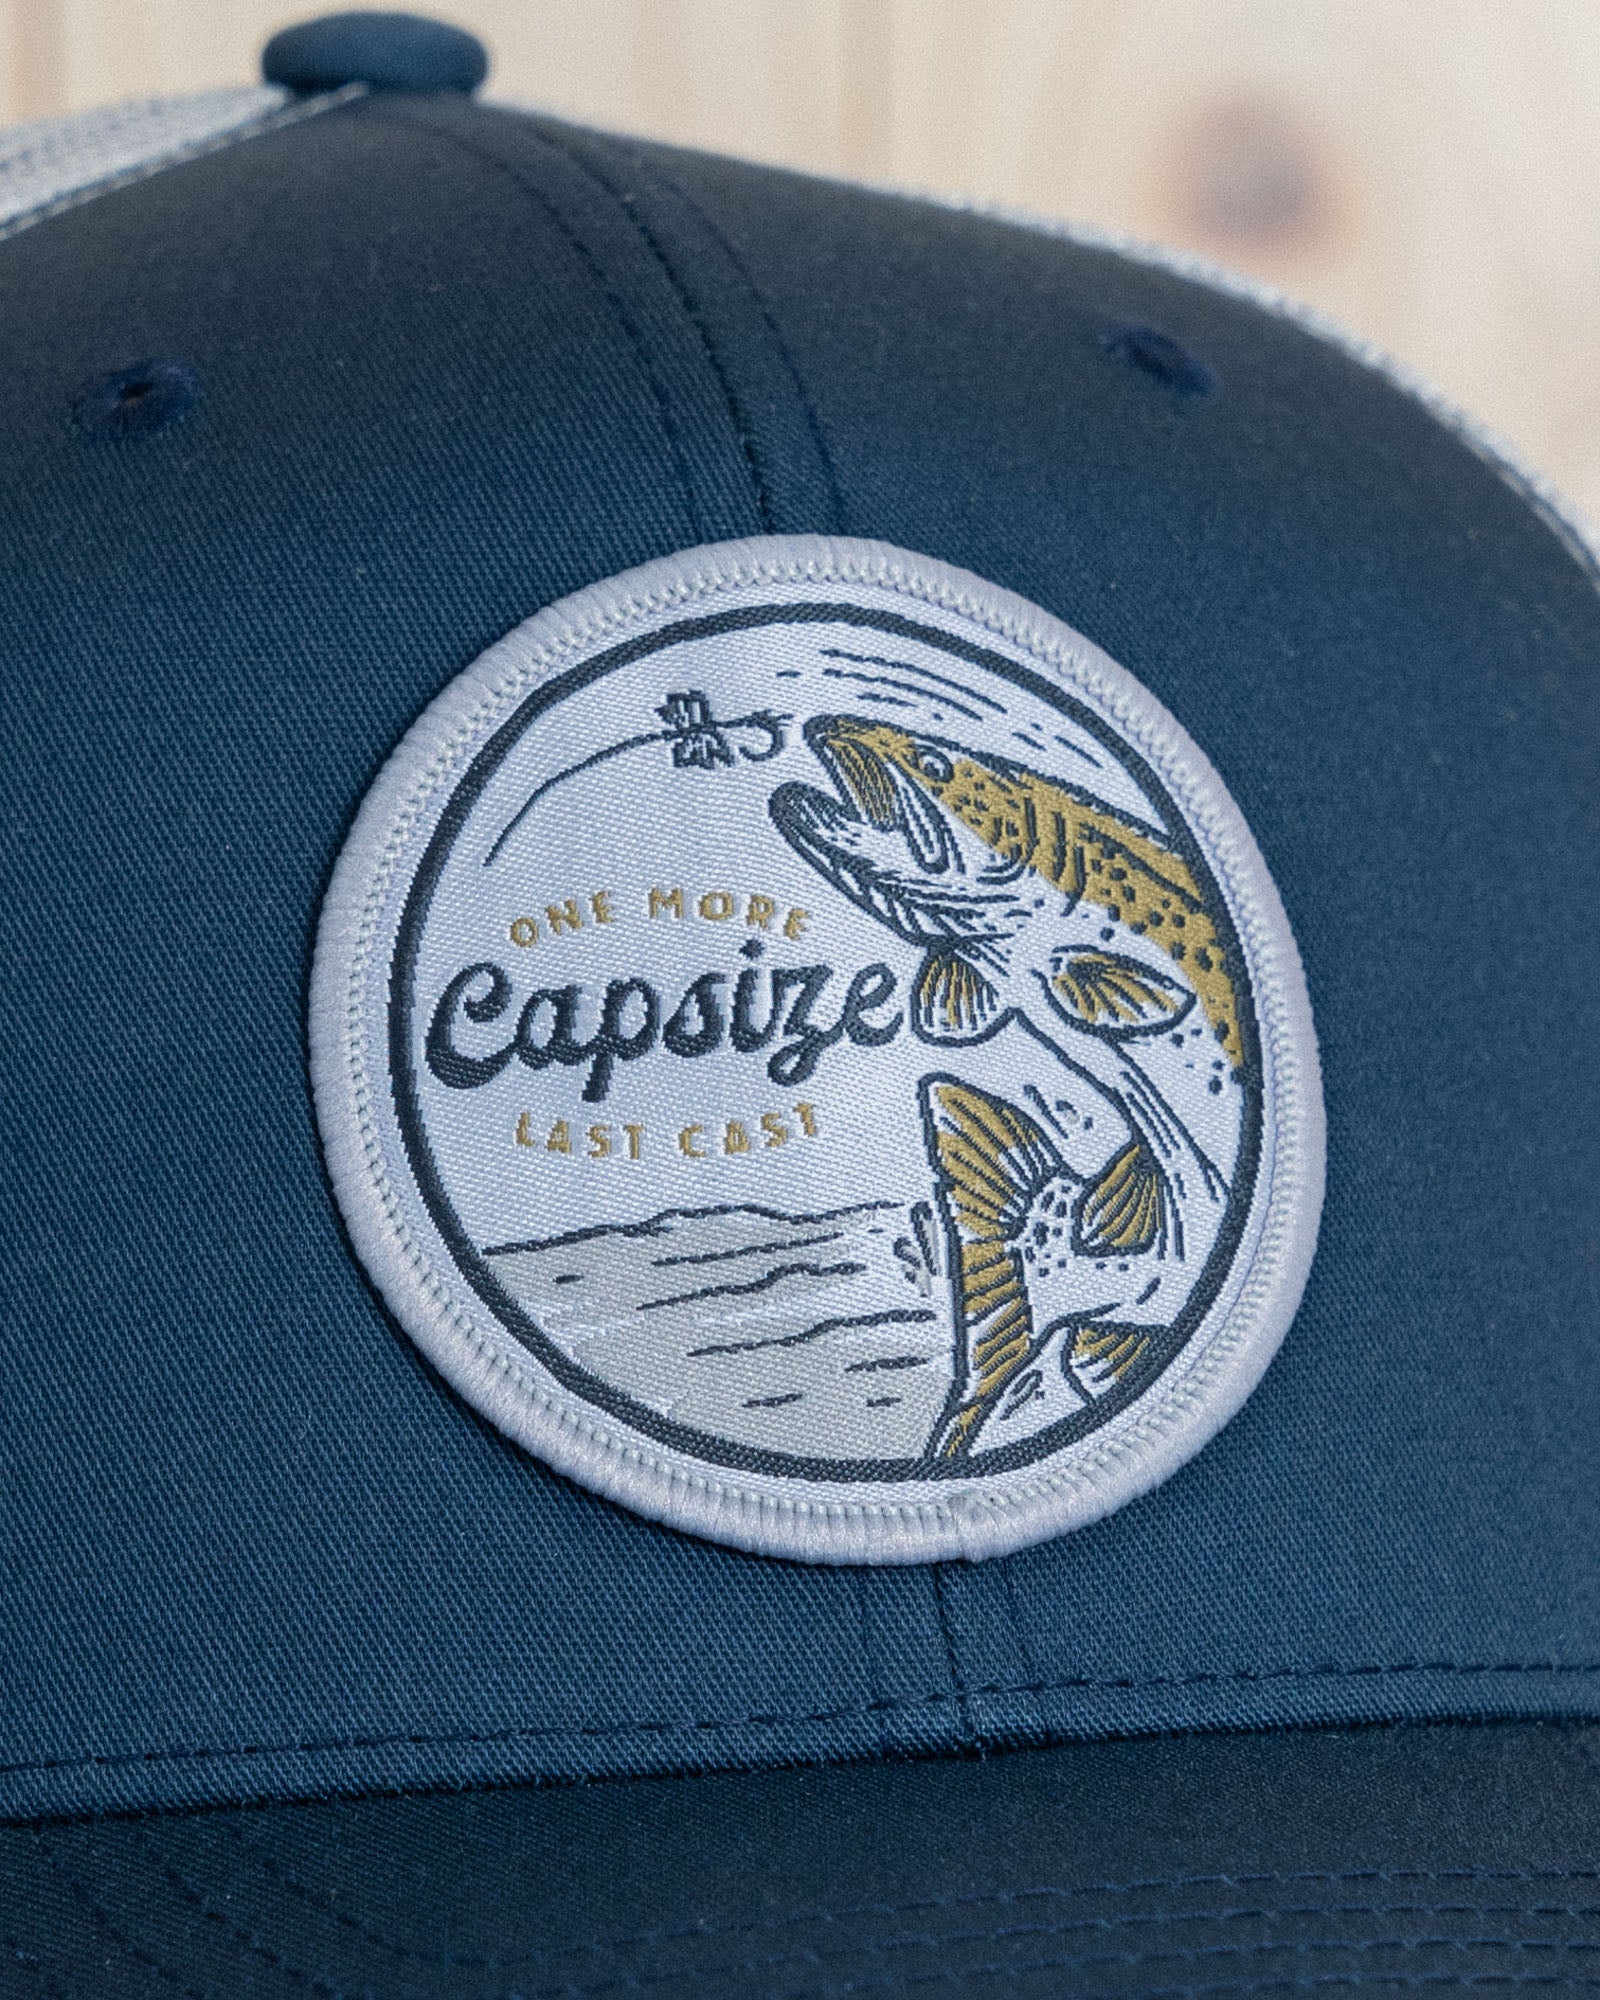 Fly Fishing Hat | One More Last Cast Trucker - Capsize Fly Fishing